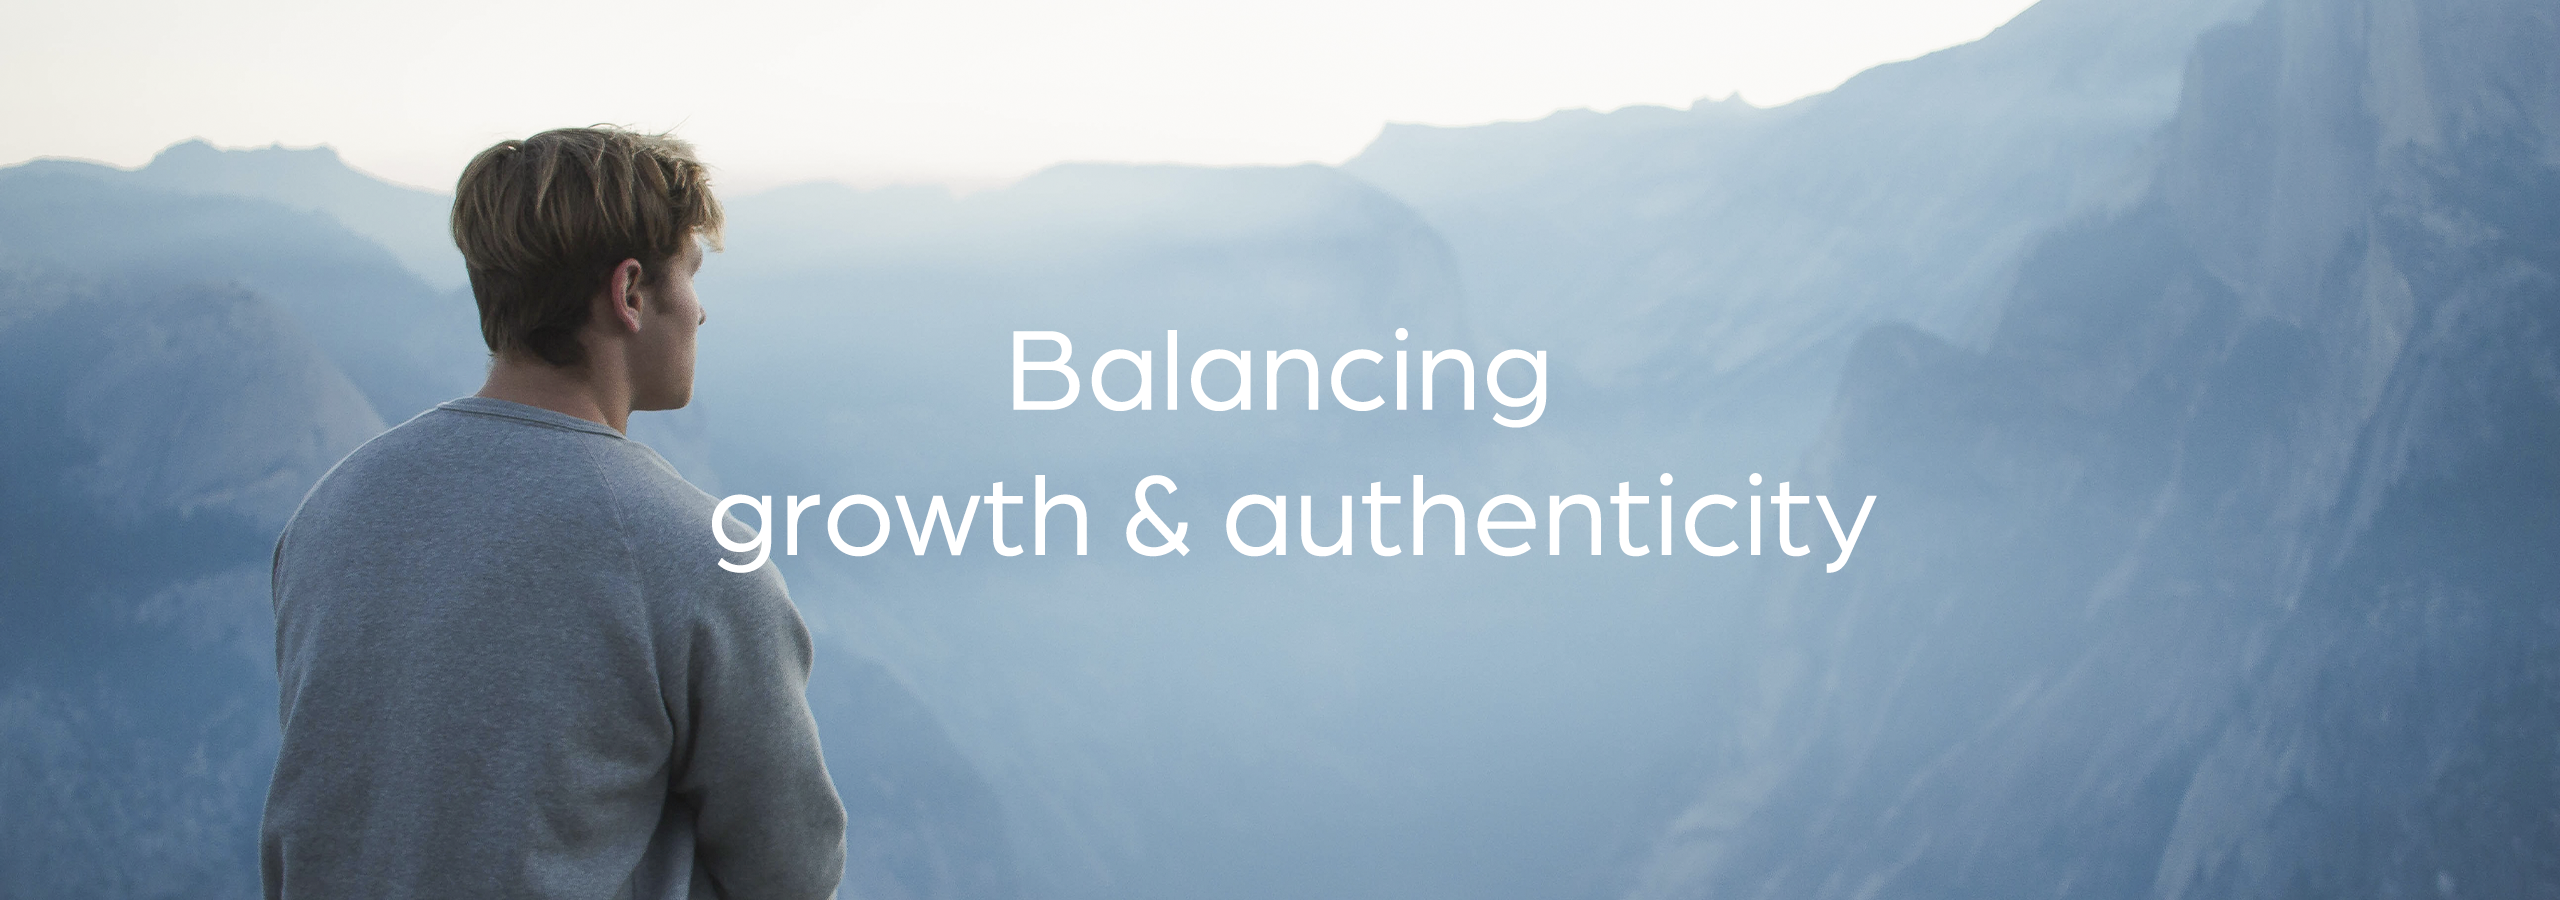 Digital mindfulness: balancing growth and authenticity